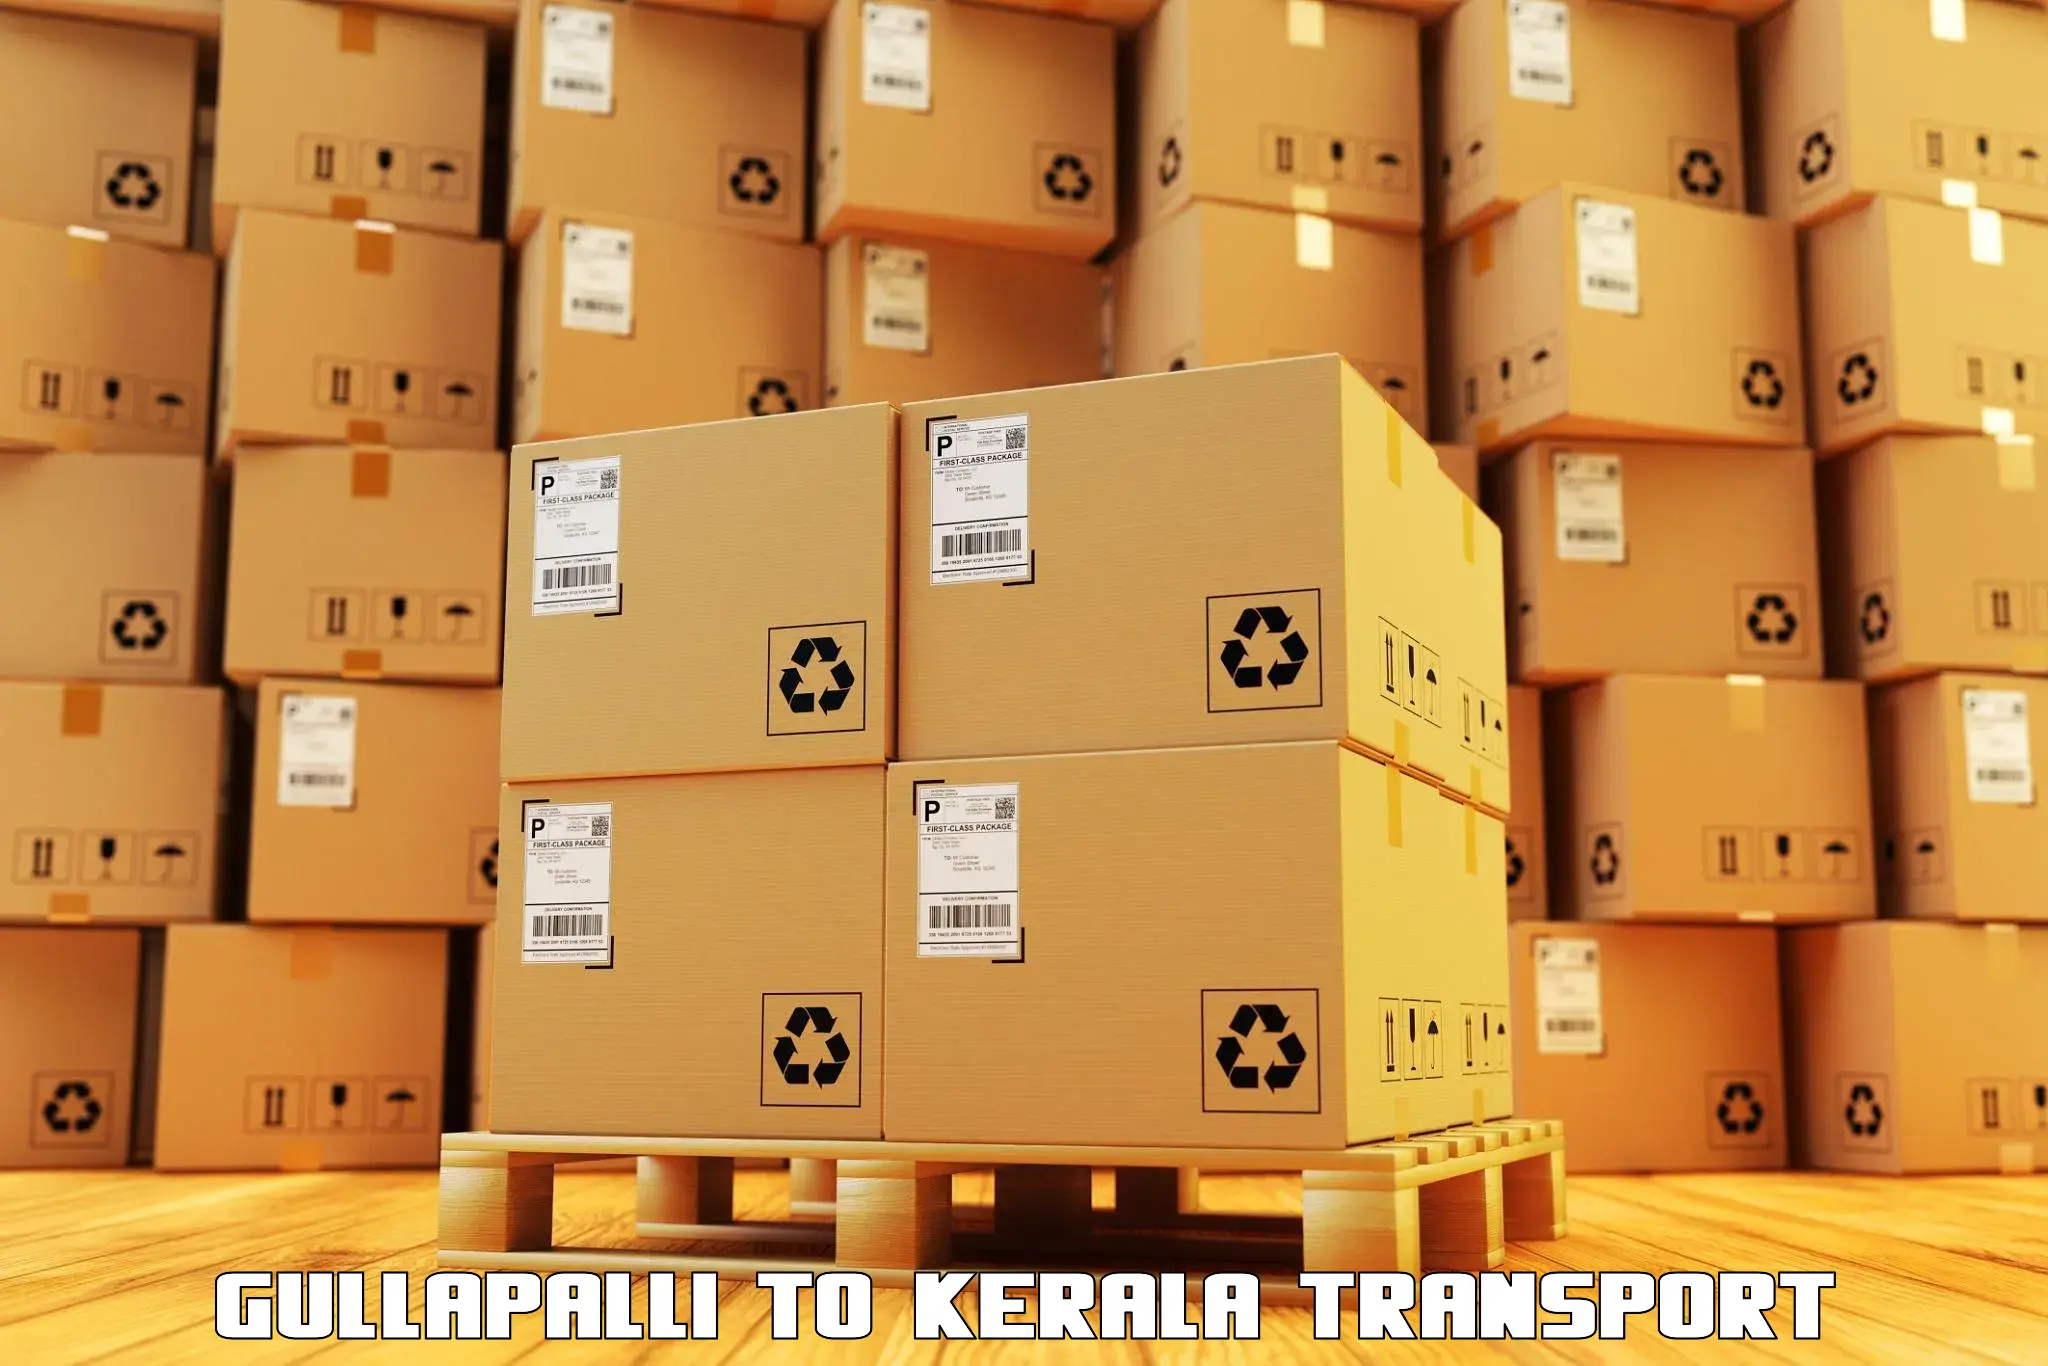 Transport bike from one state to another Gullapalli to Kerala